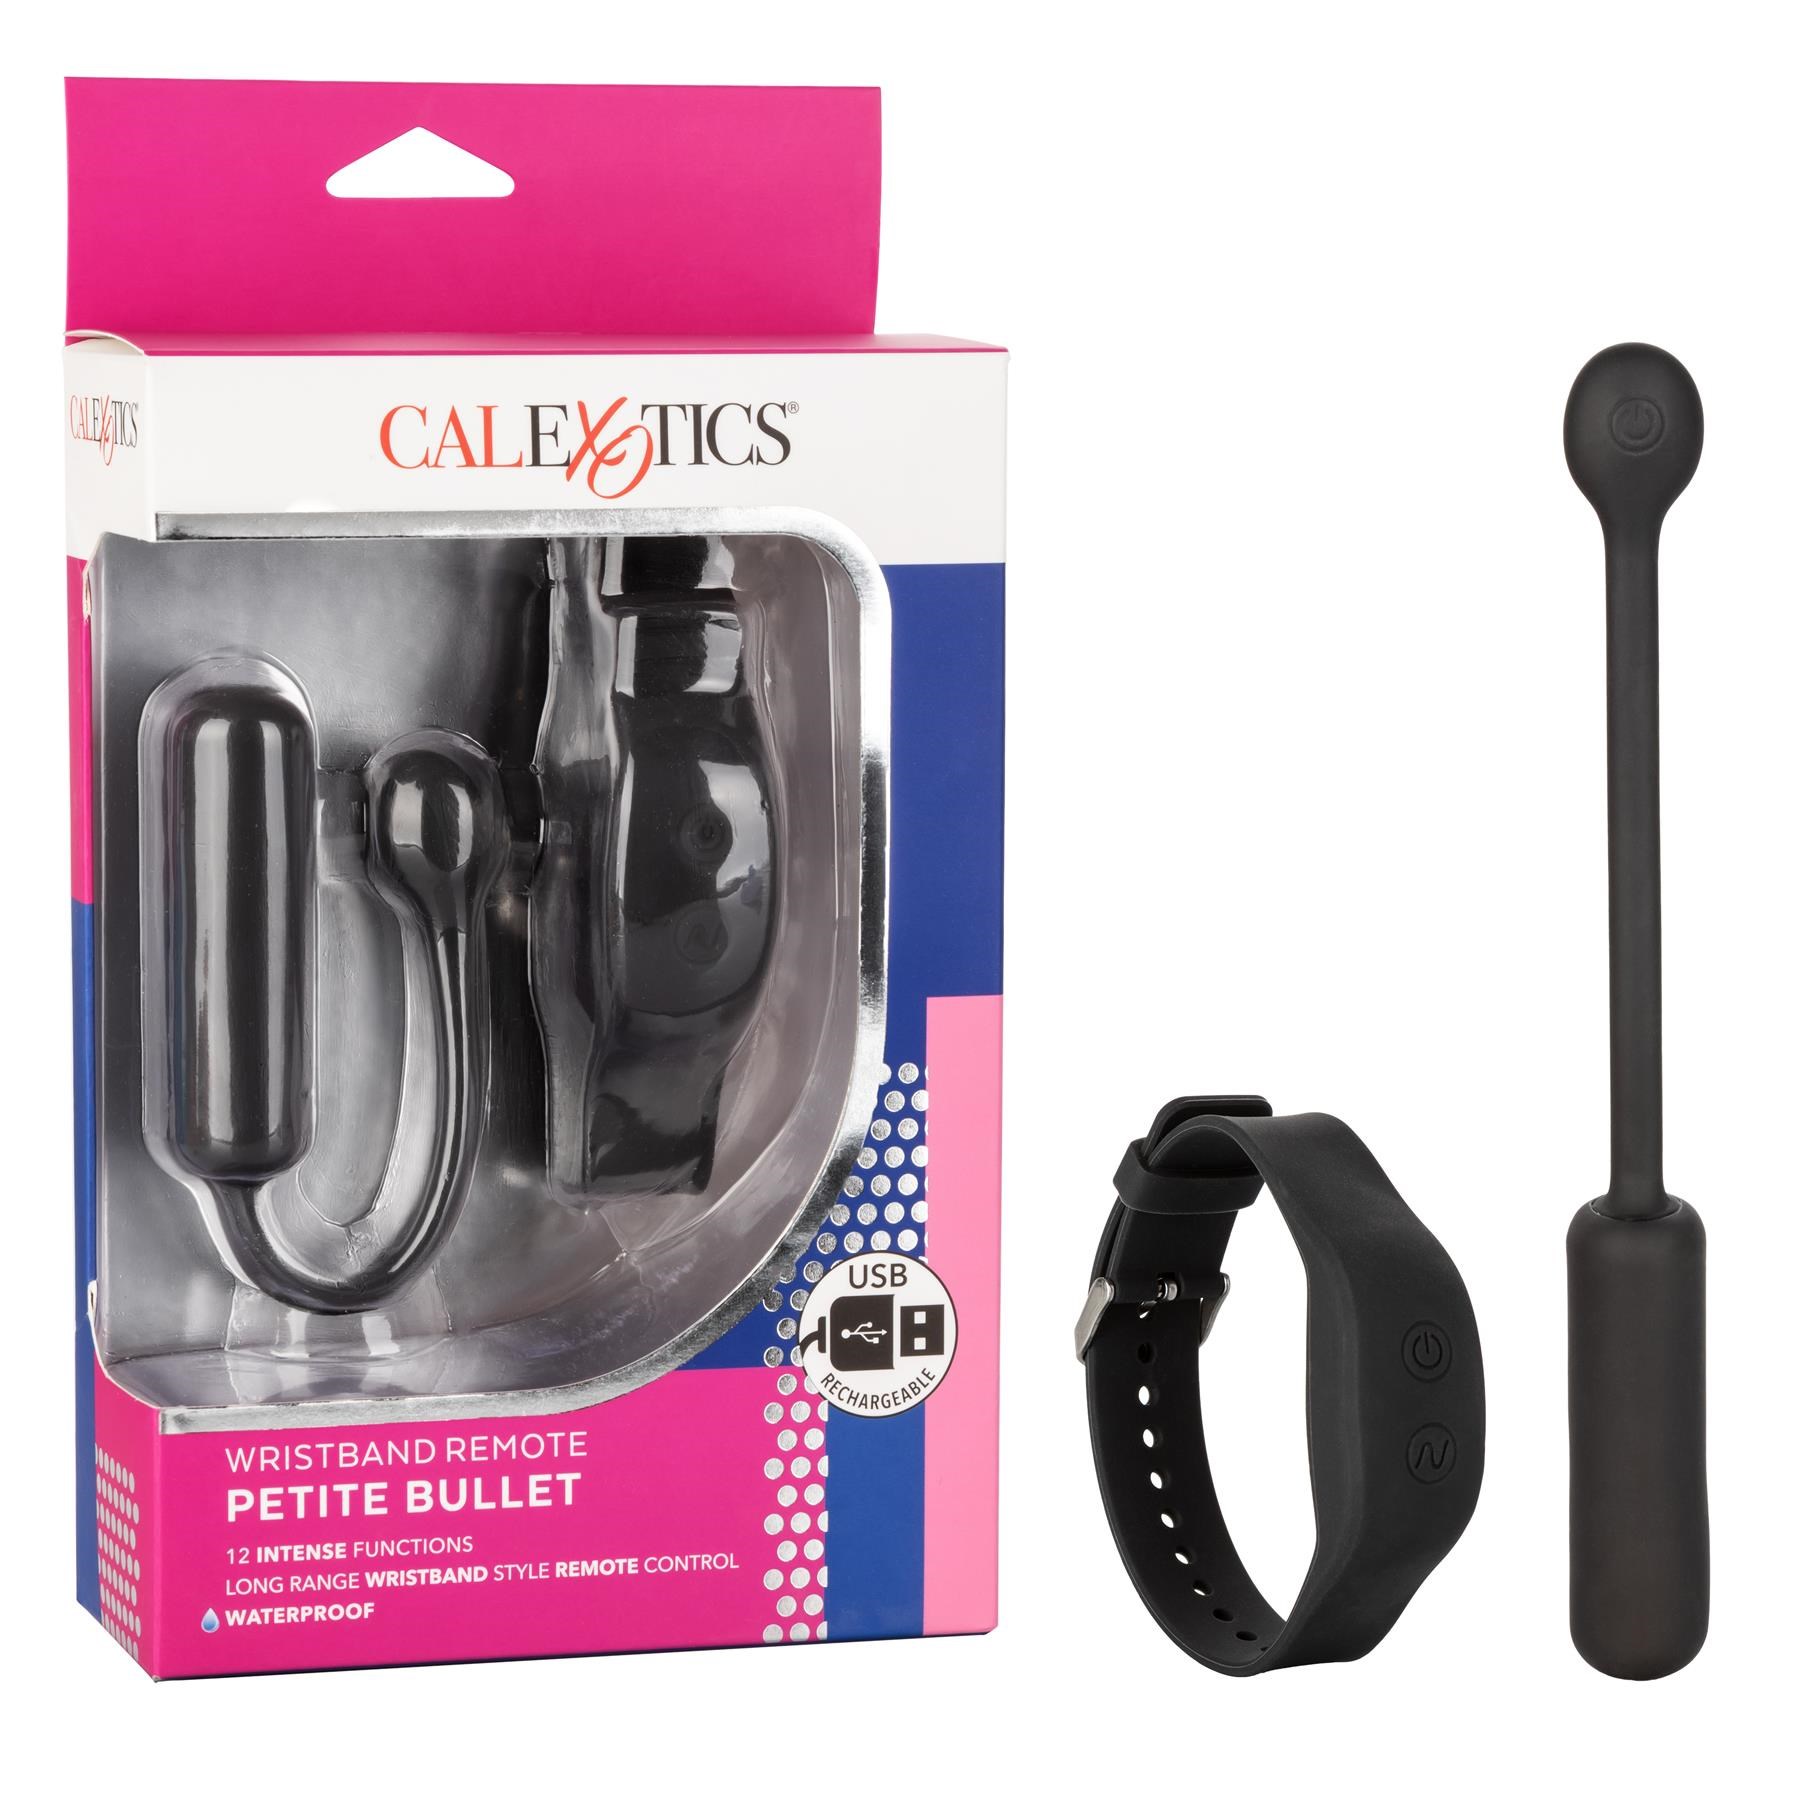 Wristband Remote Petite Bullet - Product and Packaging